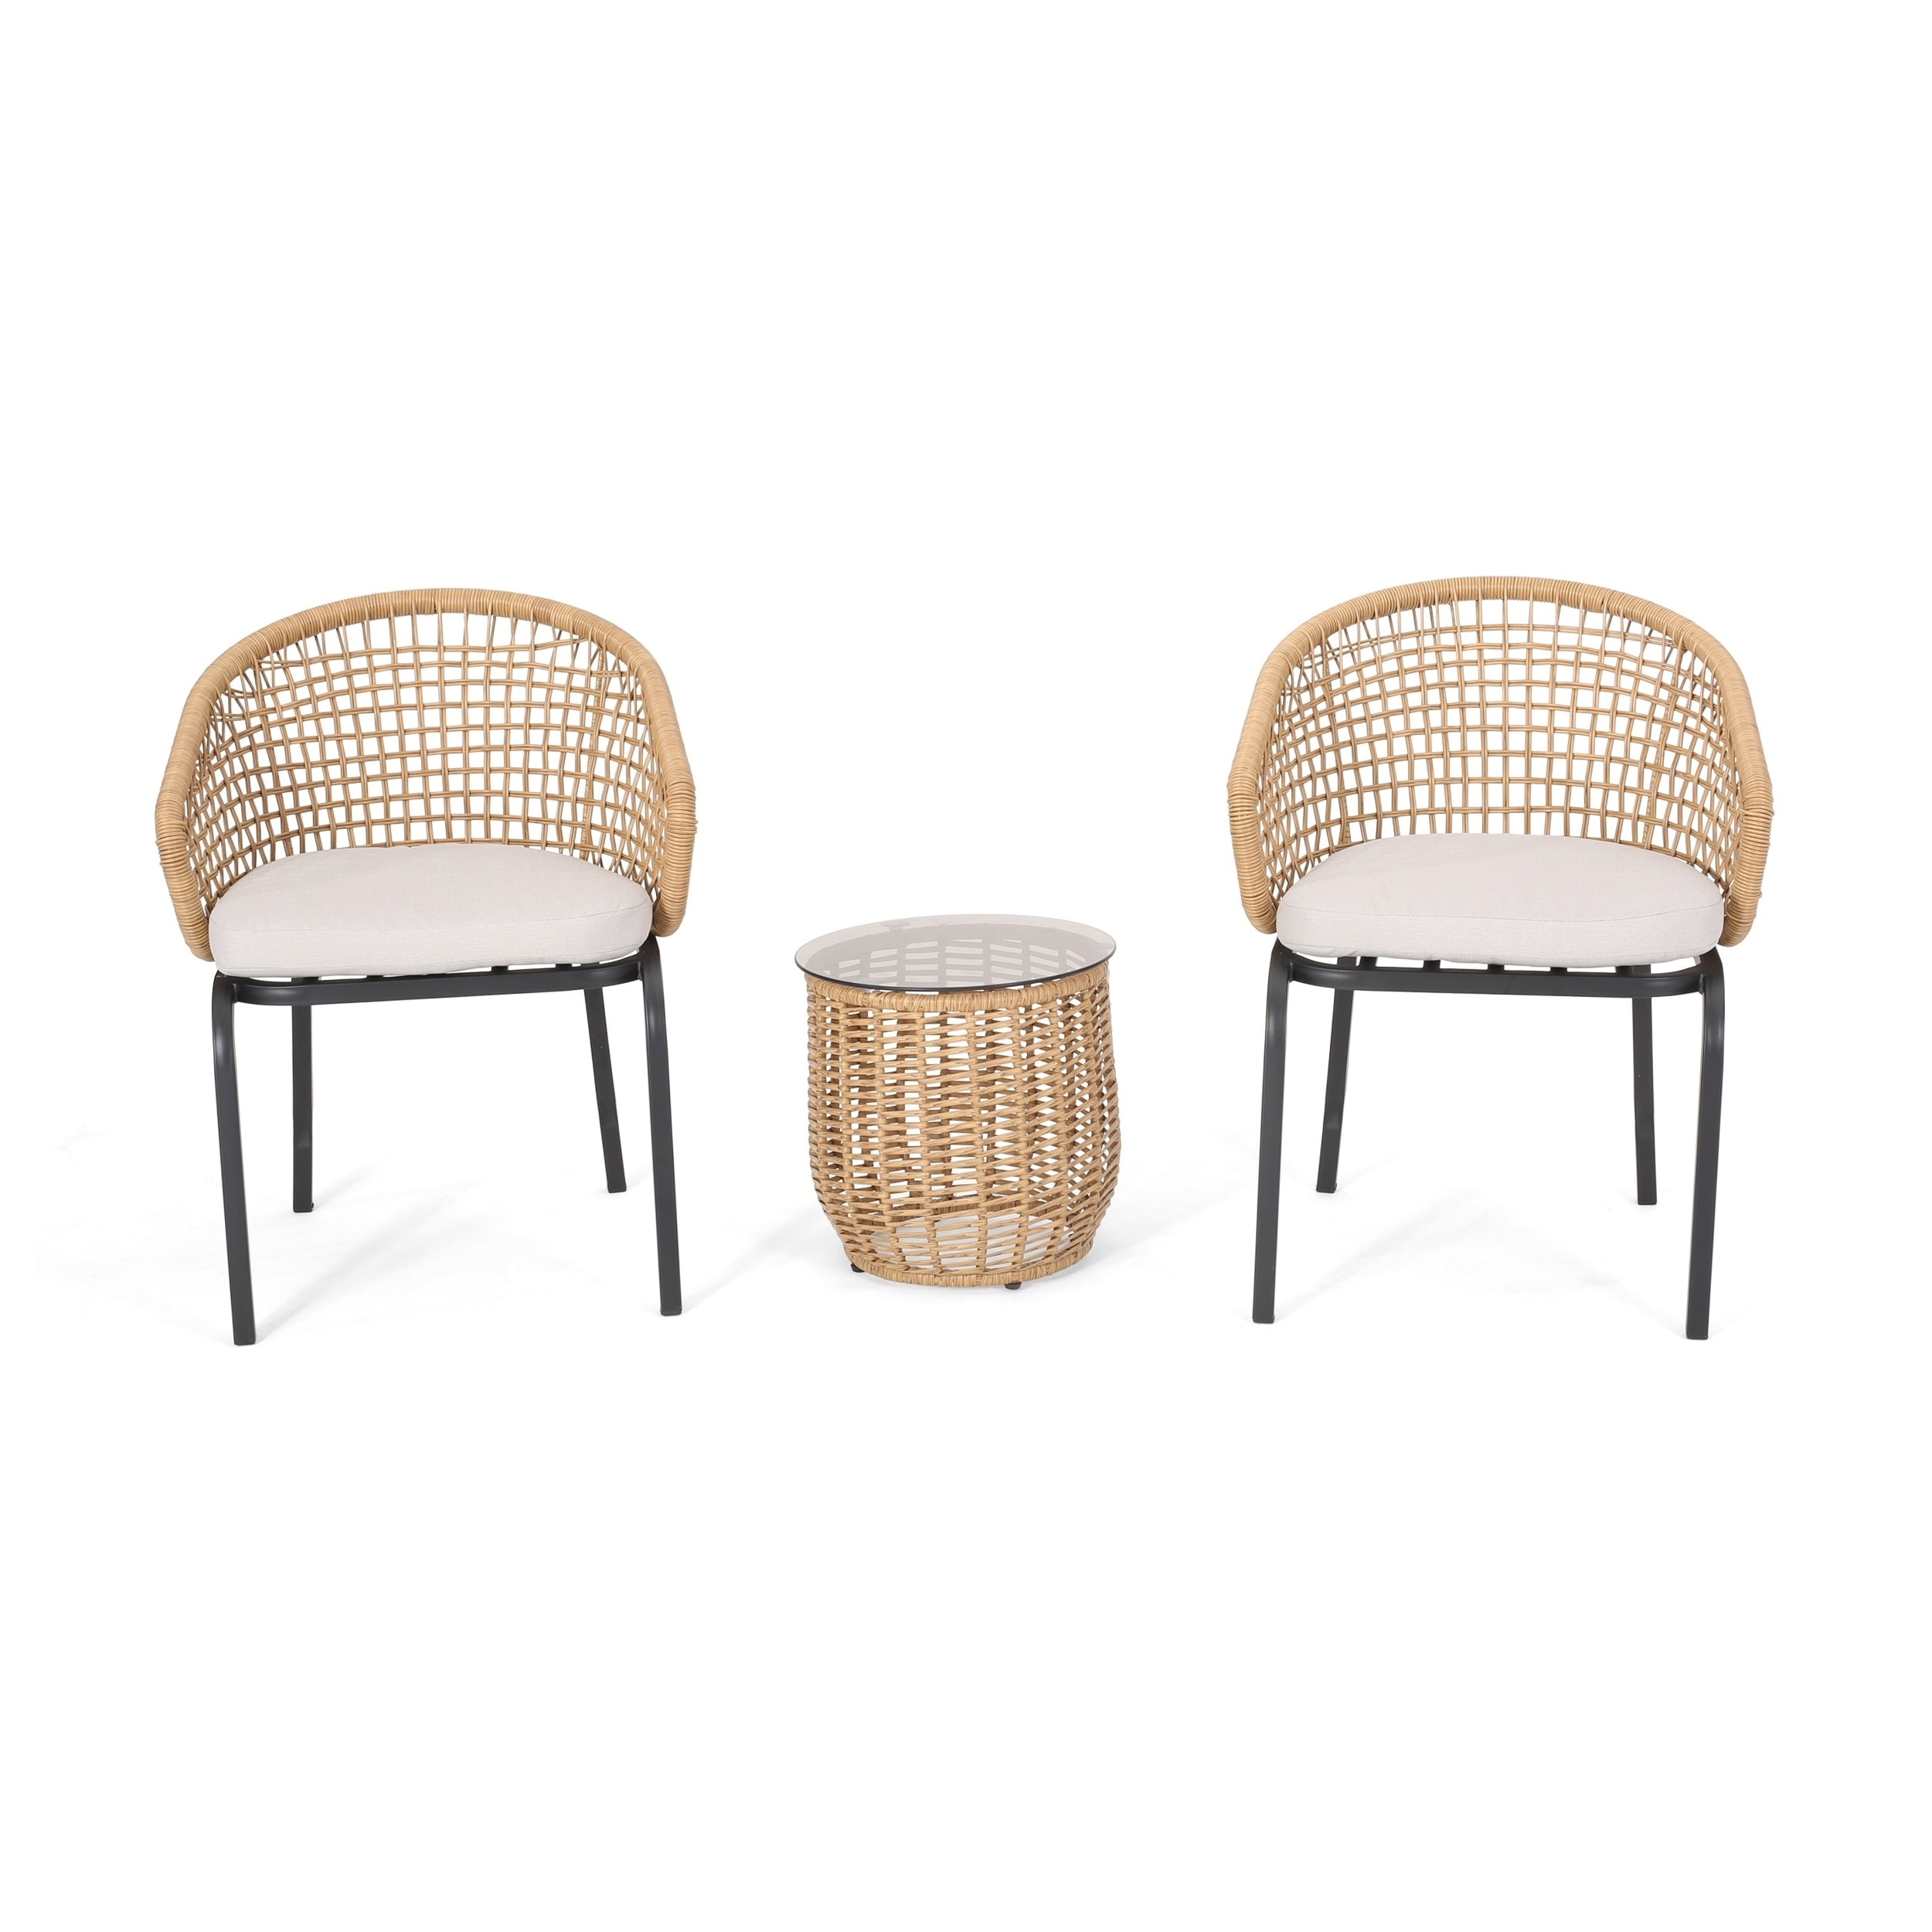 Arias Outdoor Wicker 3 Piece Chat Set With Side Table By Christopher Knight Home